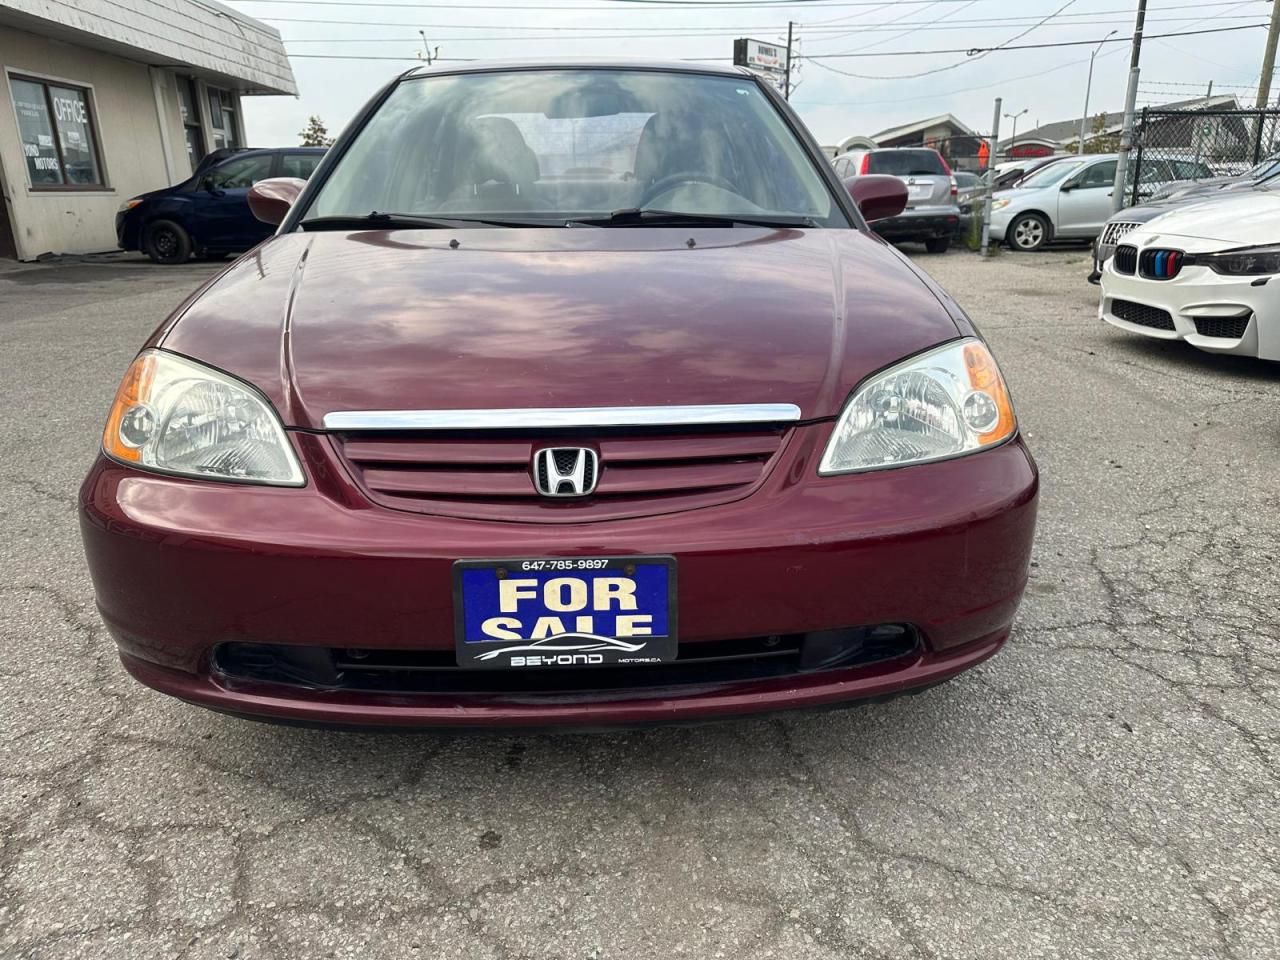 2003 Honda Civic LX certified with 3 years warranty included - Photo #1